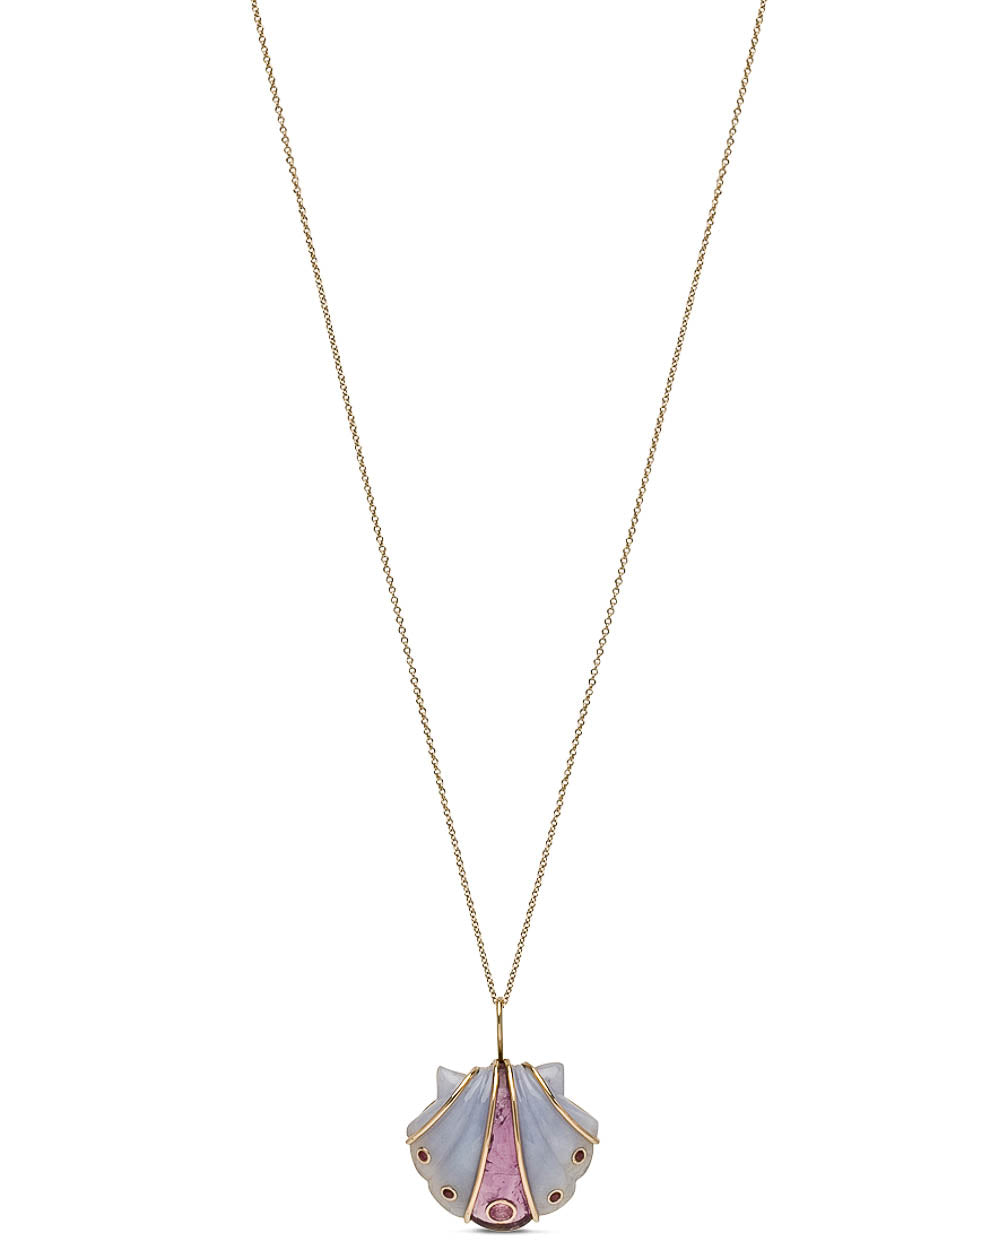 Amethyst and Chalcedony Seashell Pendant Necklace